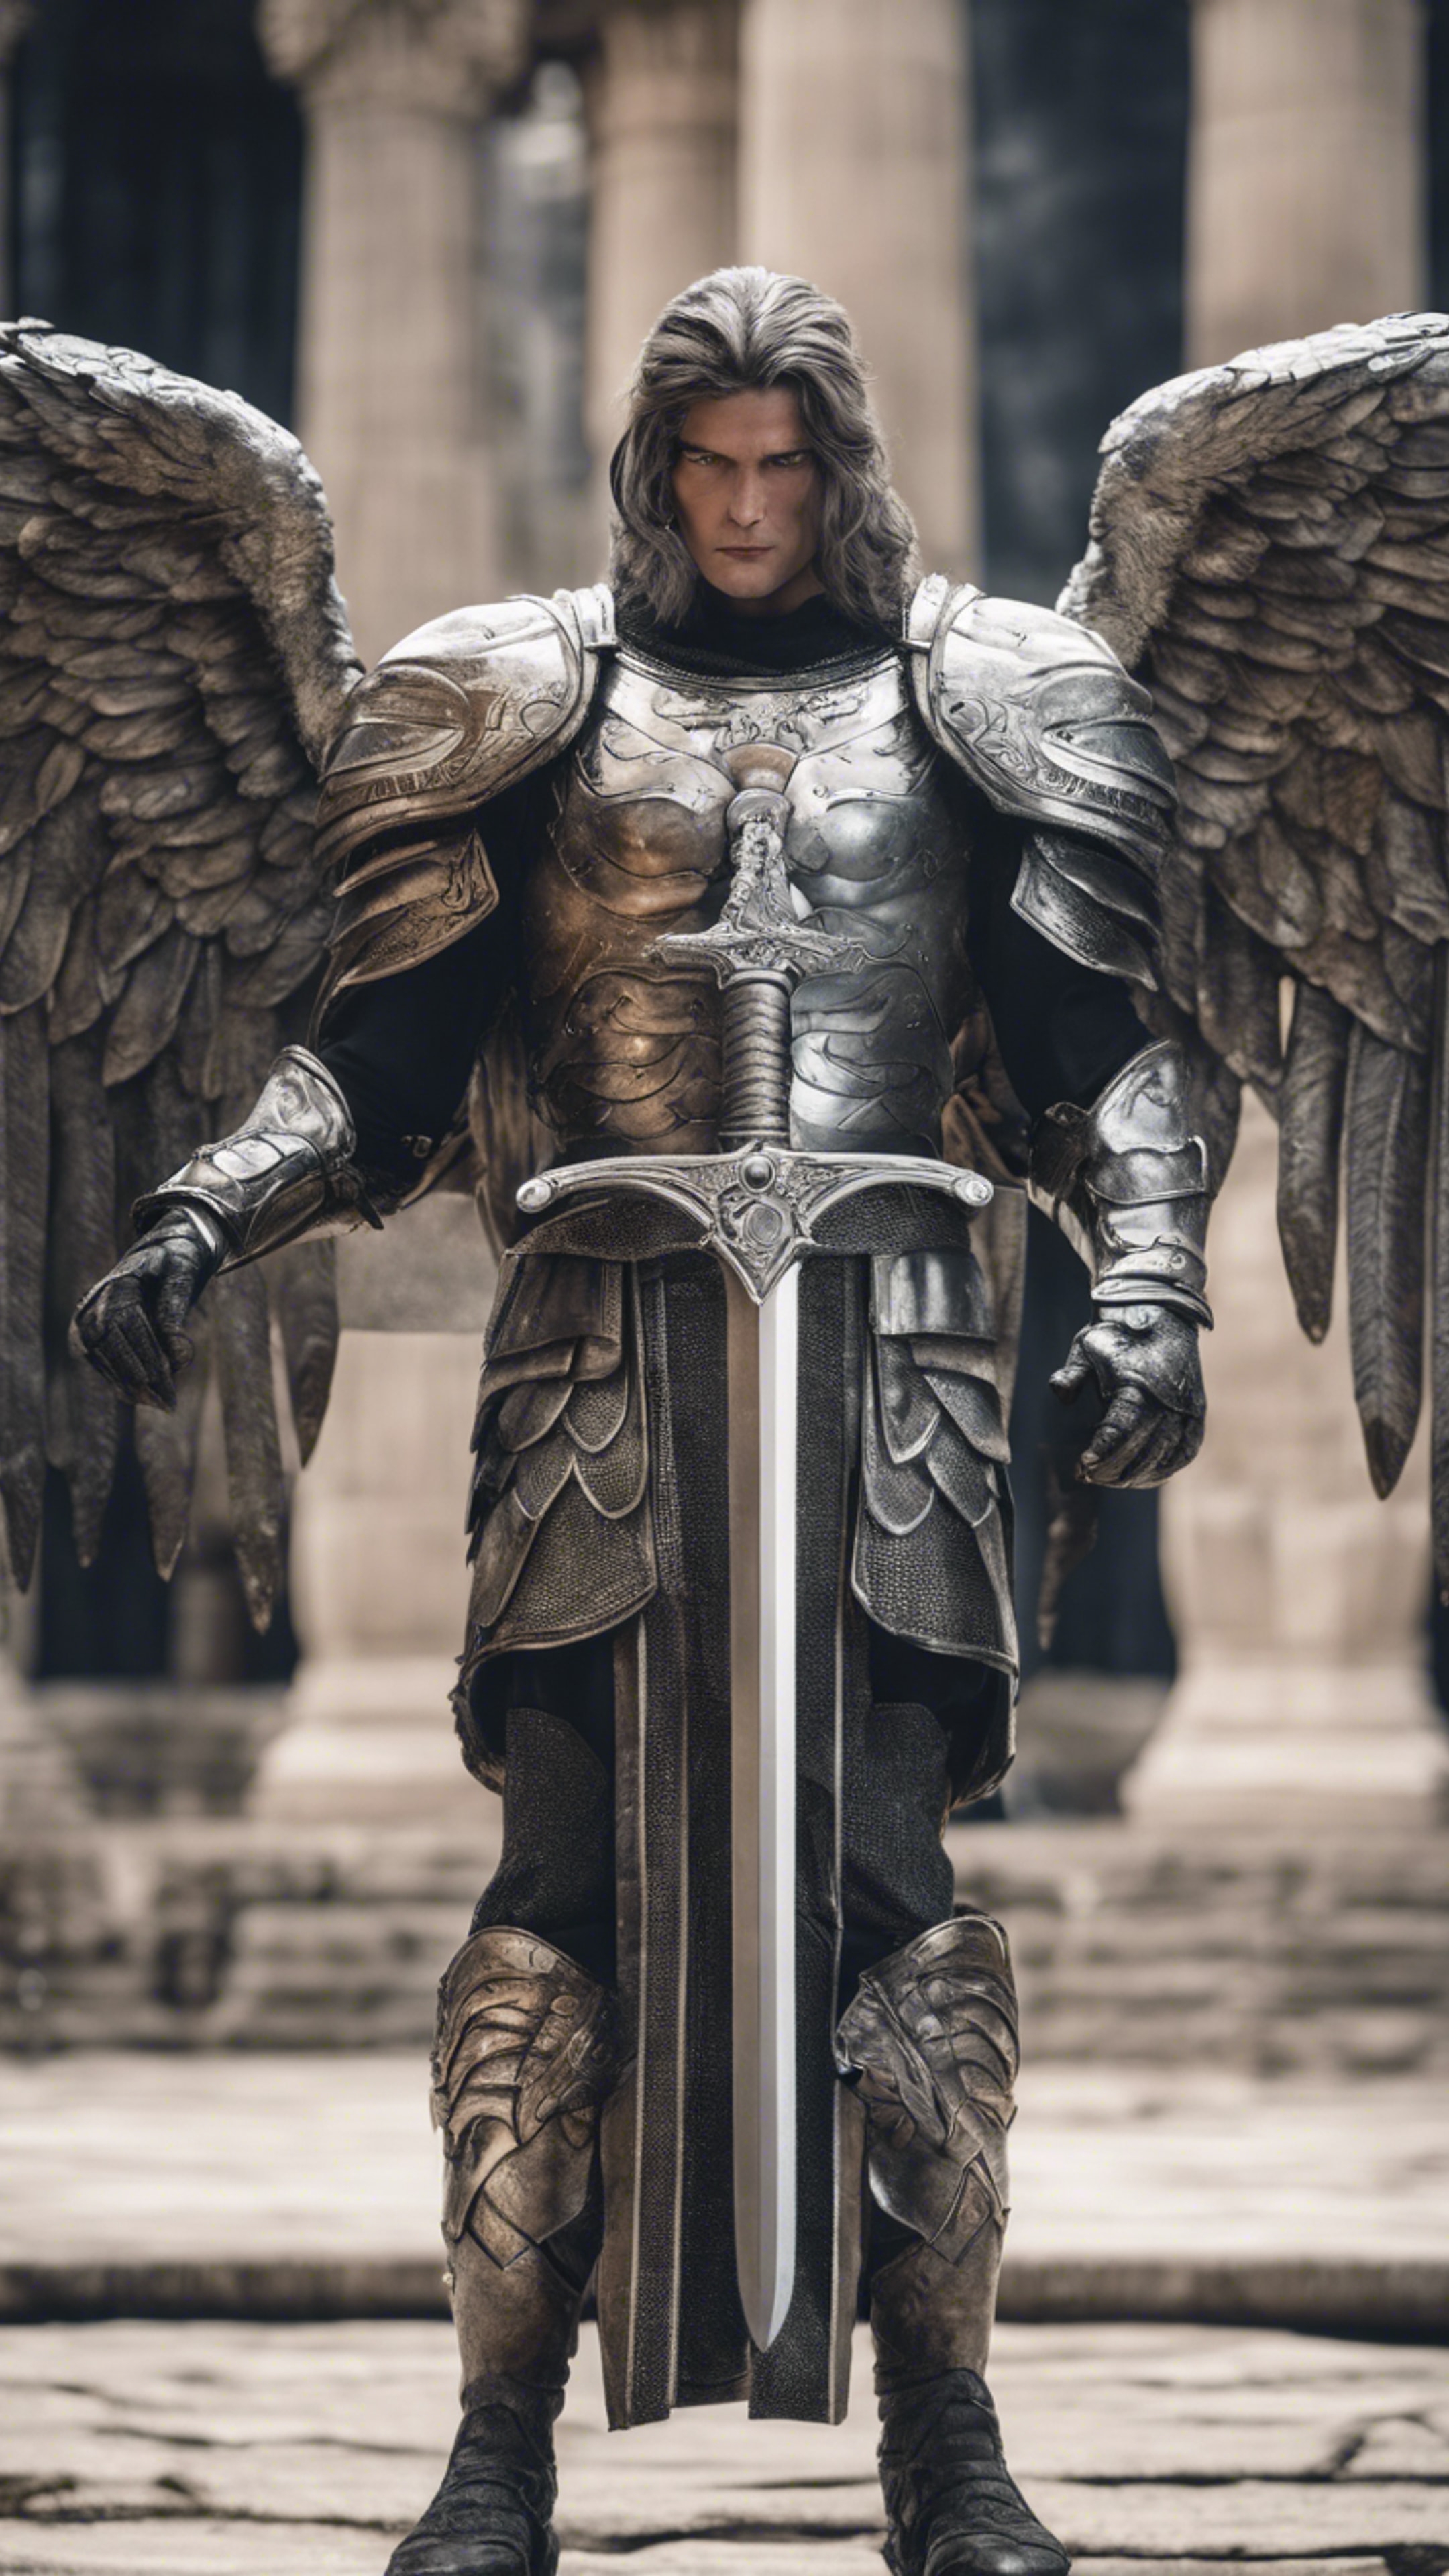 A strong archangel with a great silver sword in battle stance. Tapeta[1419cc1cb5fd40c69a58]